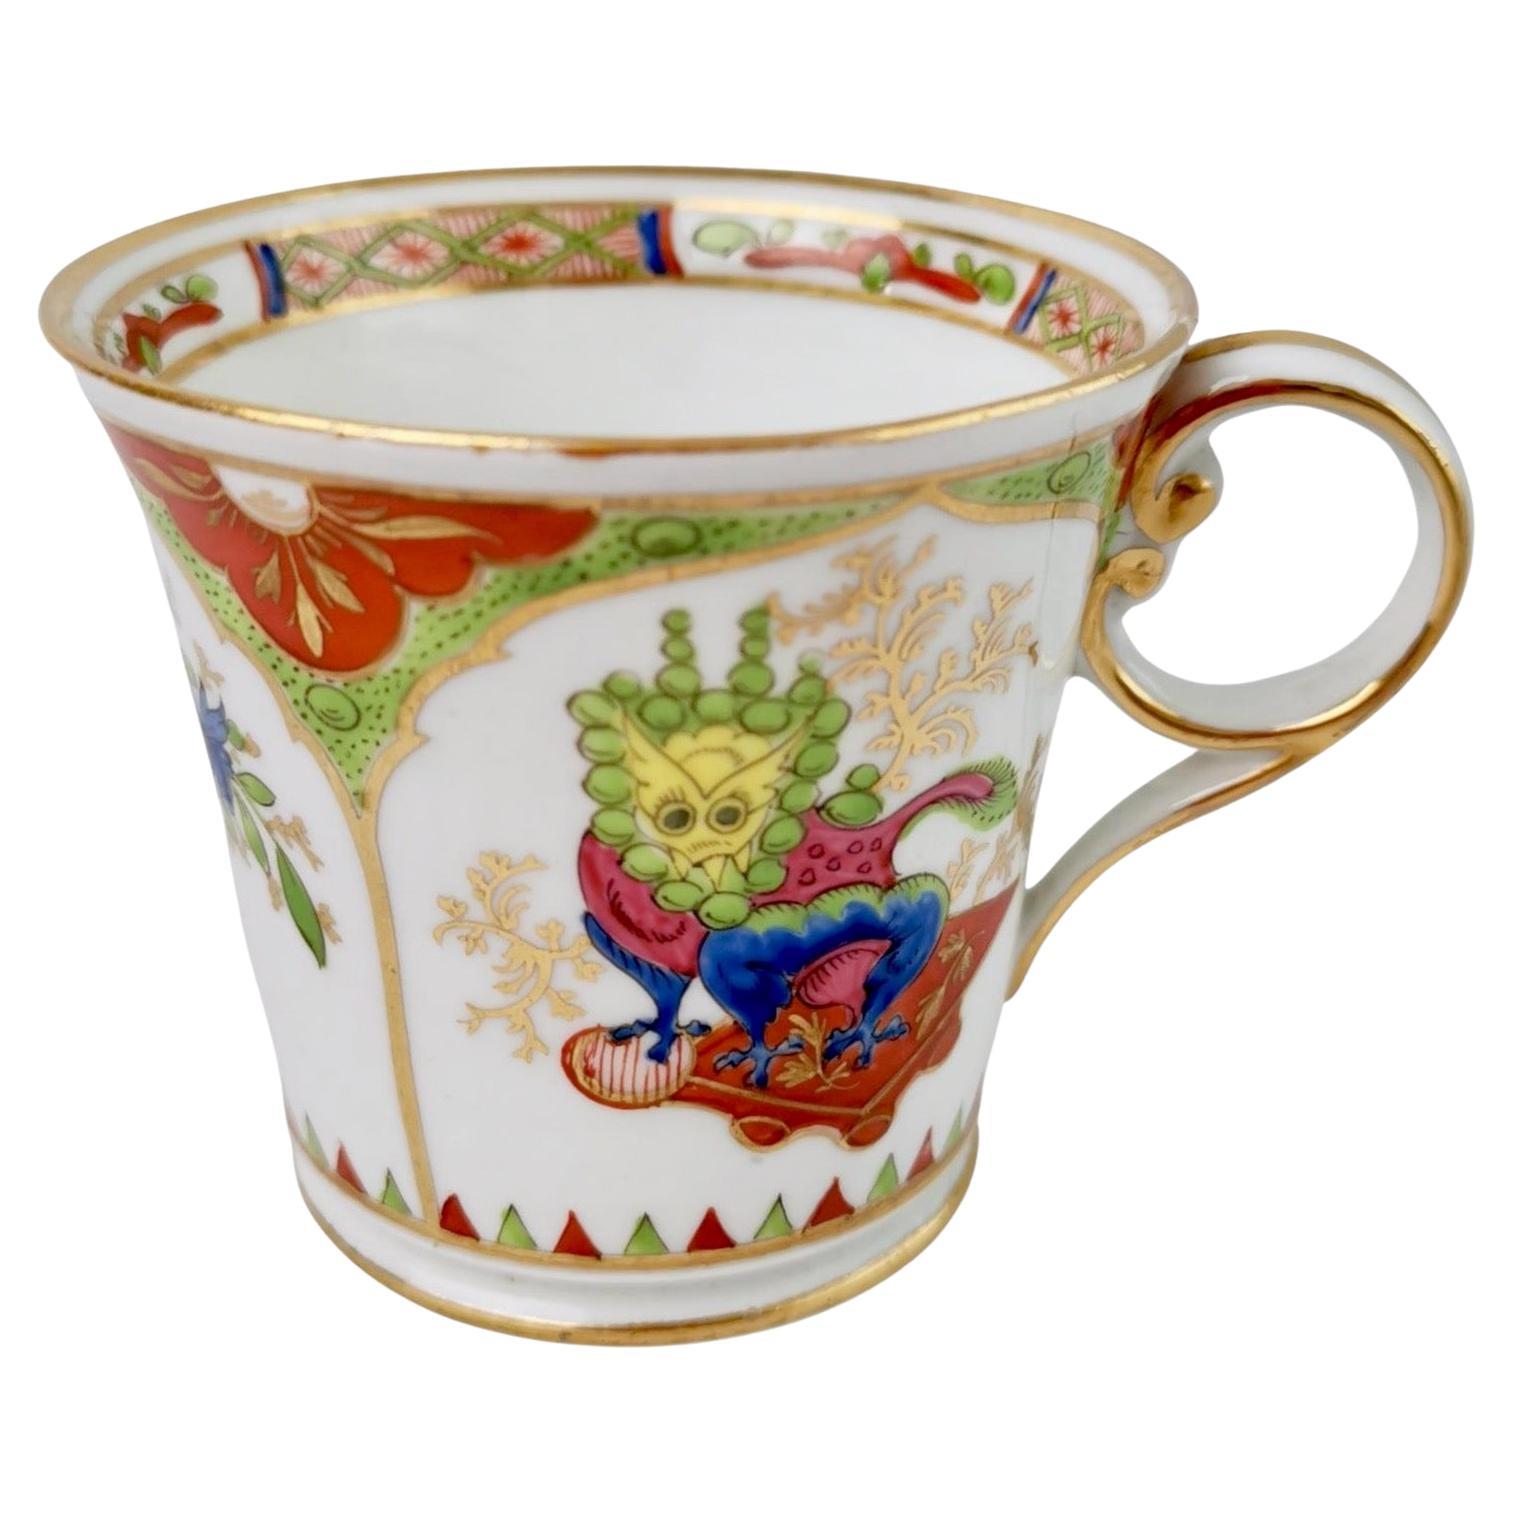 Chamberlain's Worcester Orphaned Porcelain Coffee Cup, Dragons, circa 1810